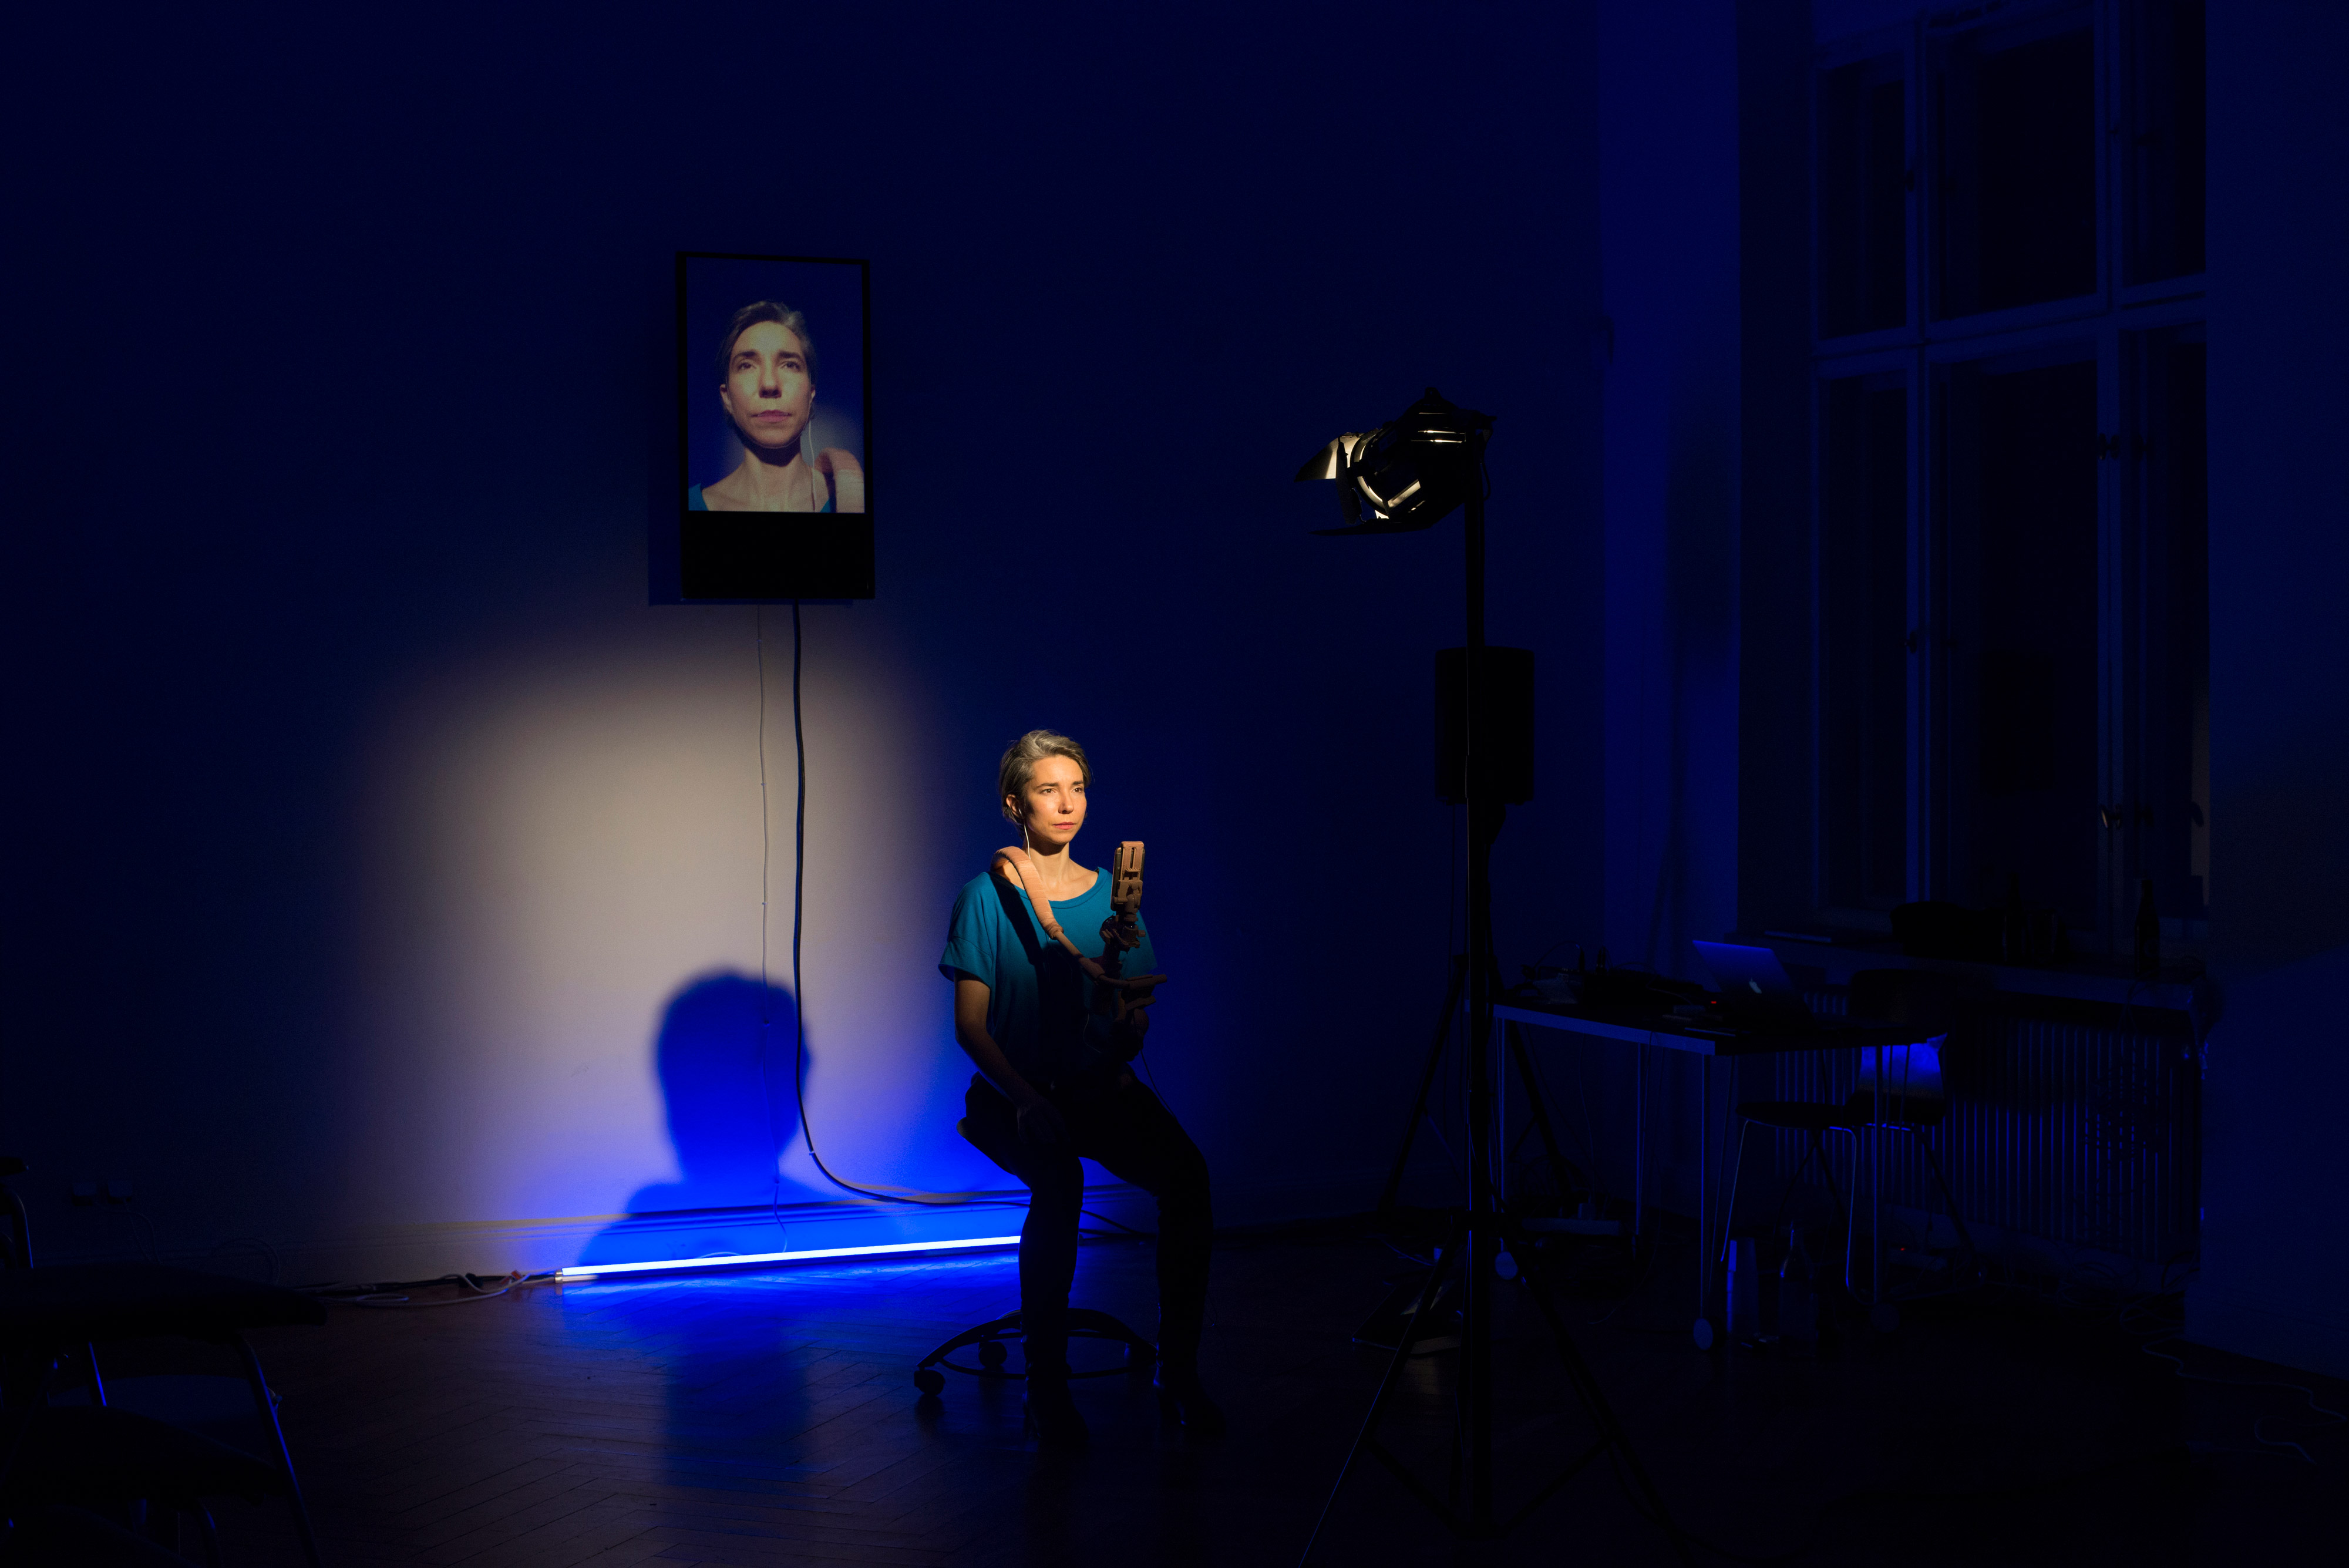 This work explores deconstructed facial expressions according to the Facial Action Coding System. This system forms the basis of contemporary emotion recognition software. With the help of the tracking mechanism of a mobile phone the performance demonstrates a computational approach to our emotions.